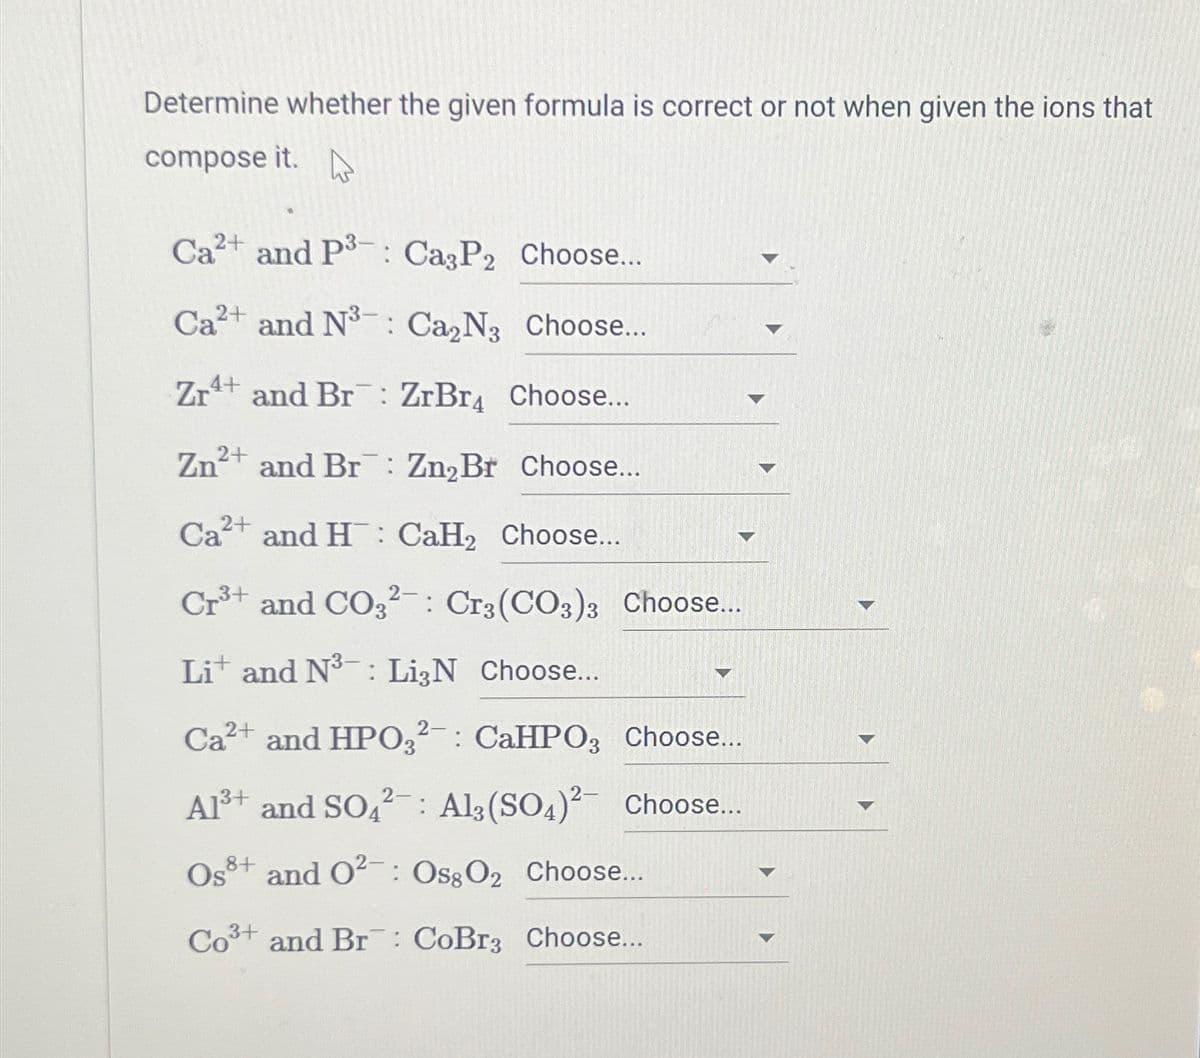 Determine whether the given formula is correct or not when given the ions that
compose it.
Ca²+ and P3: Ca3P2 Choose...
Ca2+ and N³: Ca₂N3 Choose...
Zr and Br: ZrBr4 Choose...
2+
Zn²+ and Br: Zn₂Br Choose...
Ca²+ and H CaH₂ Choose...
Cr³+ and CO32: Cr3(CO3)3 Choose...
Lit and N³: Li3N Choose...
Ca²+ and HPO32: CaHPO3 Choose...
A1³+ and SO42: Al(SO4)2 Choose...
Os+ and 0²: Oss O2 Choose...
Co³+ and Br: CoBr3 Choose...
1